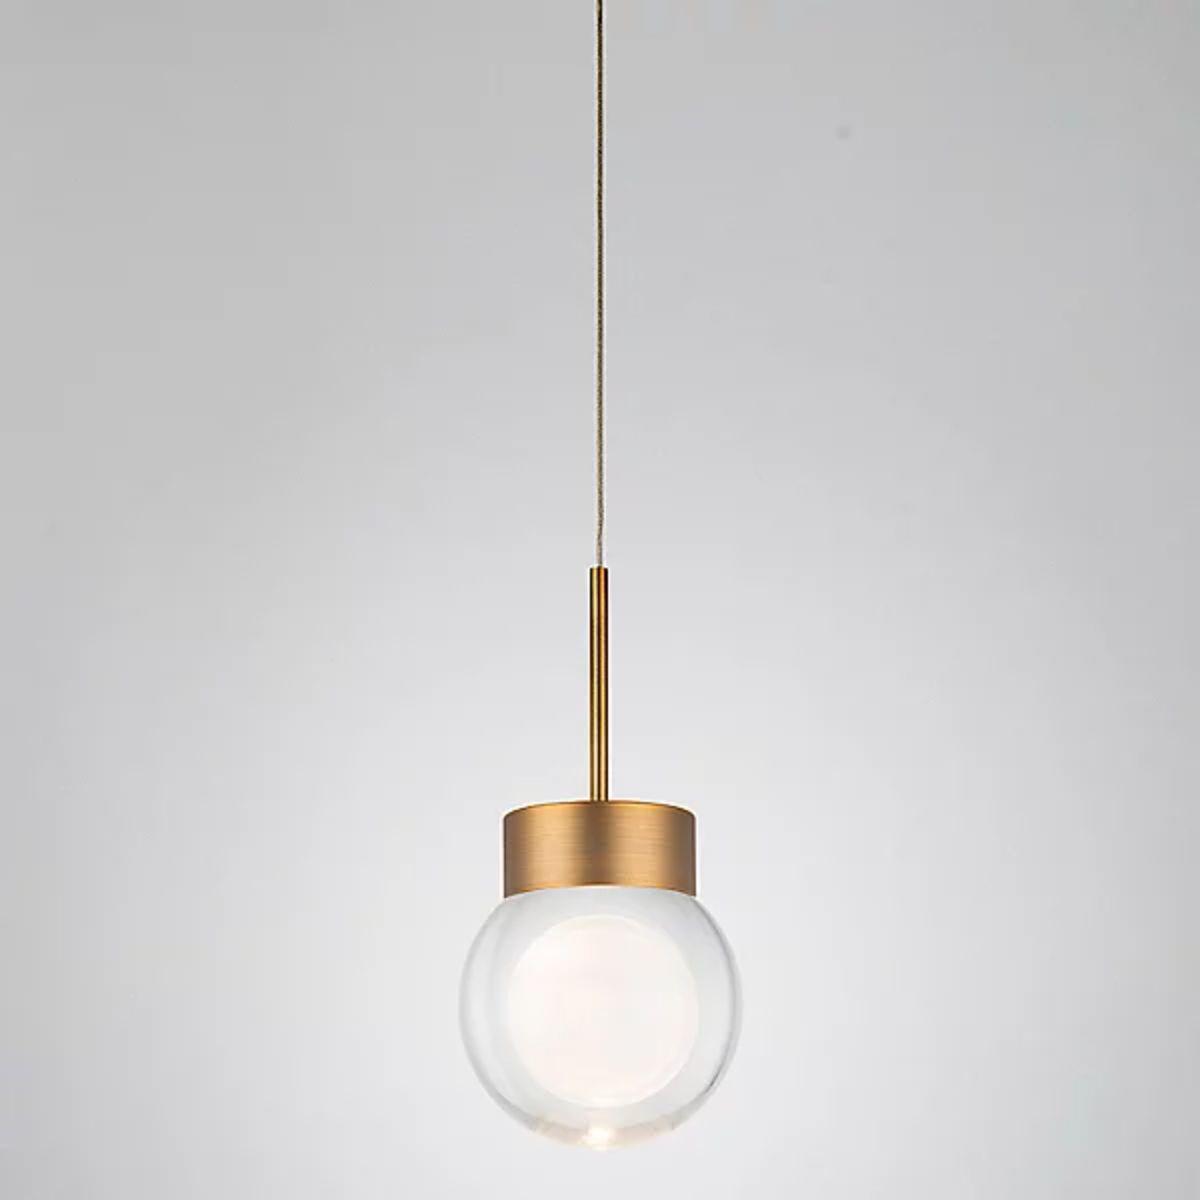 Double Bubble 5 in. LED Pendant Light - Bees Lighting